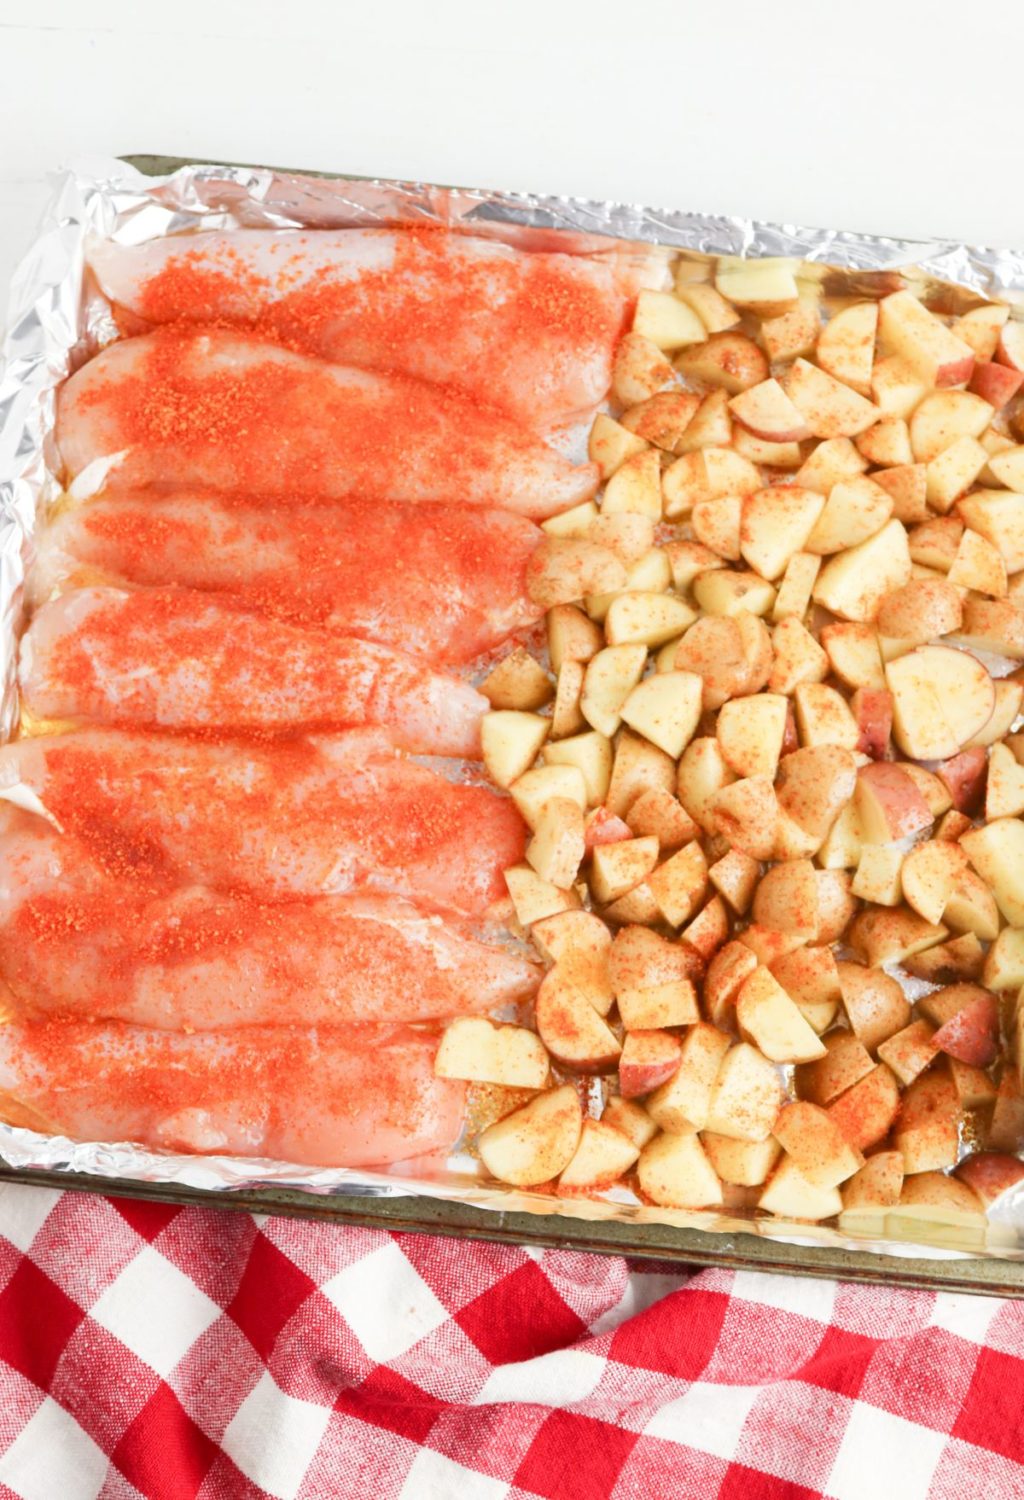 A baking sheet with salmon and potatoes on it.